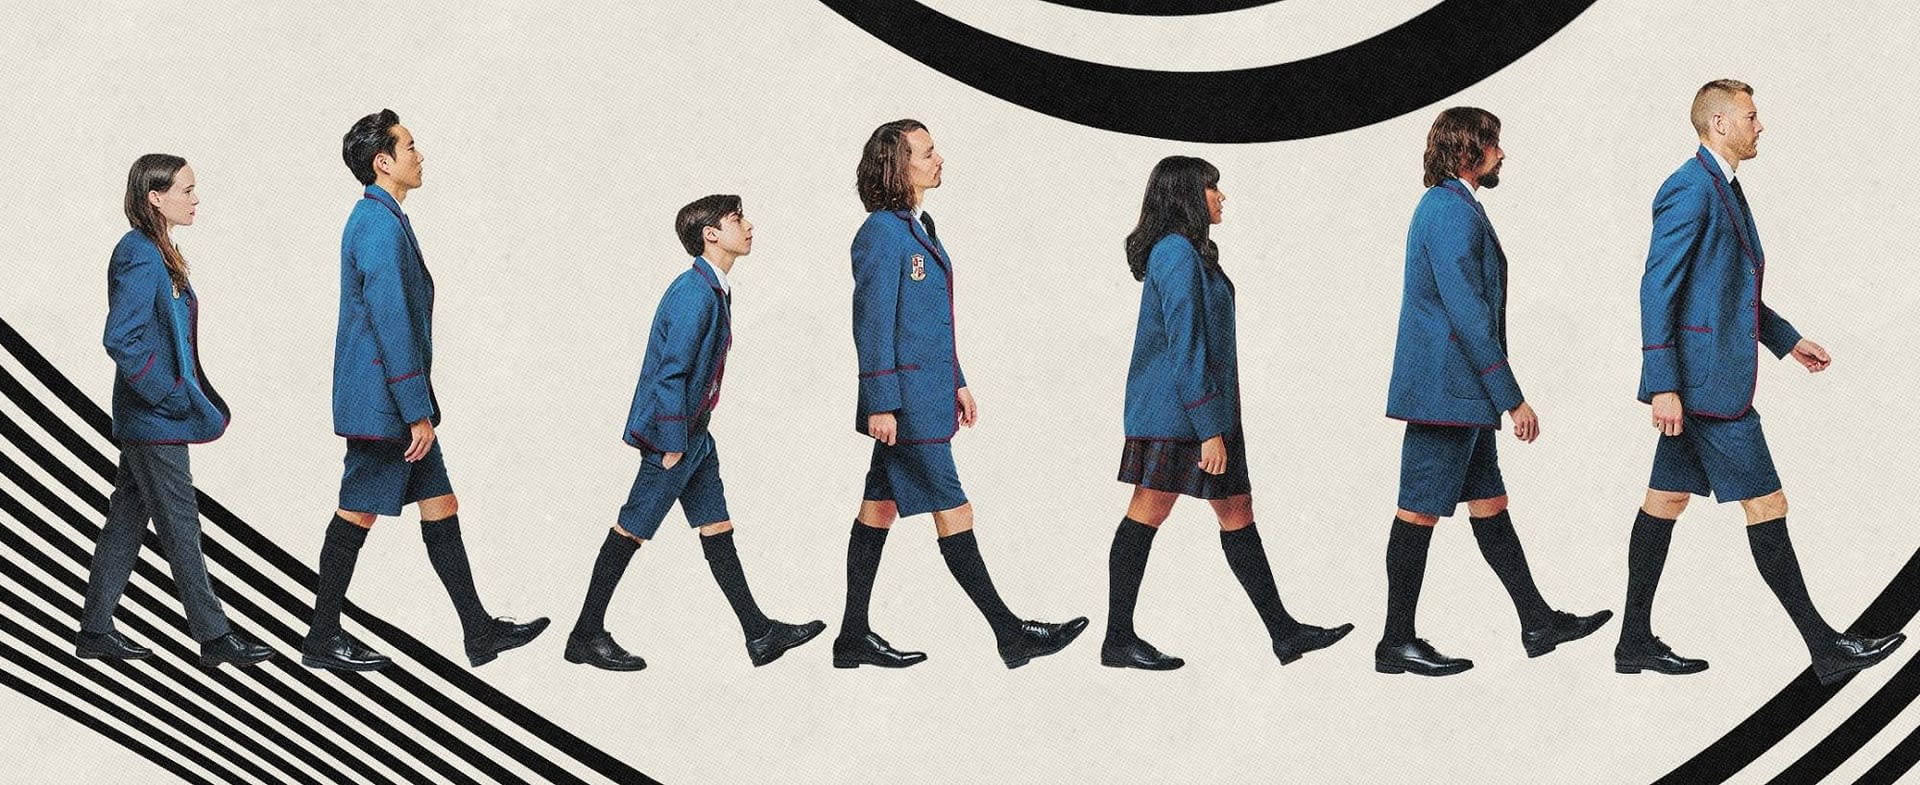 The countdown to The Umbrella Academy season 2 continues (Image: Netflix)